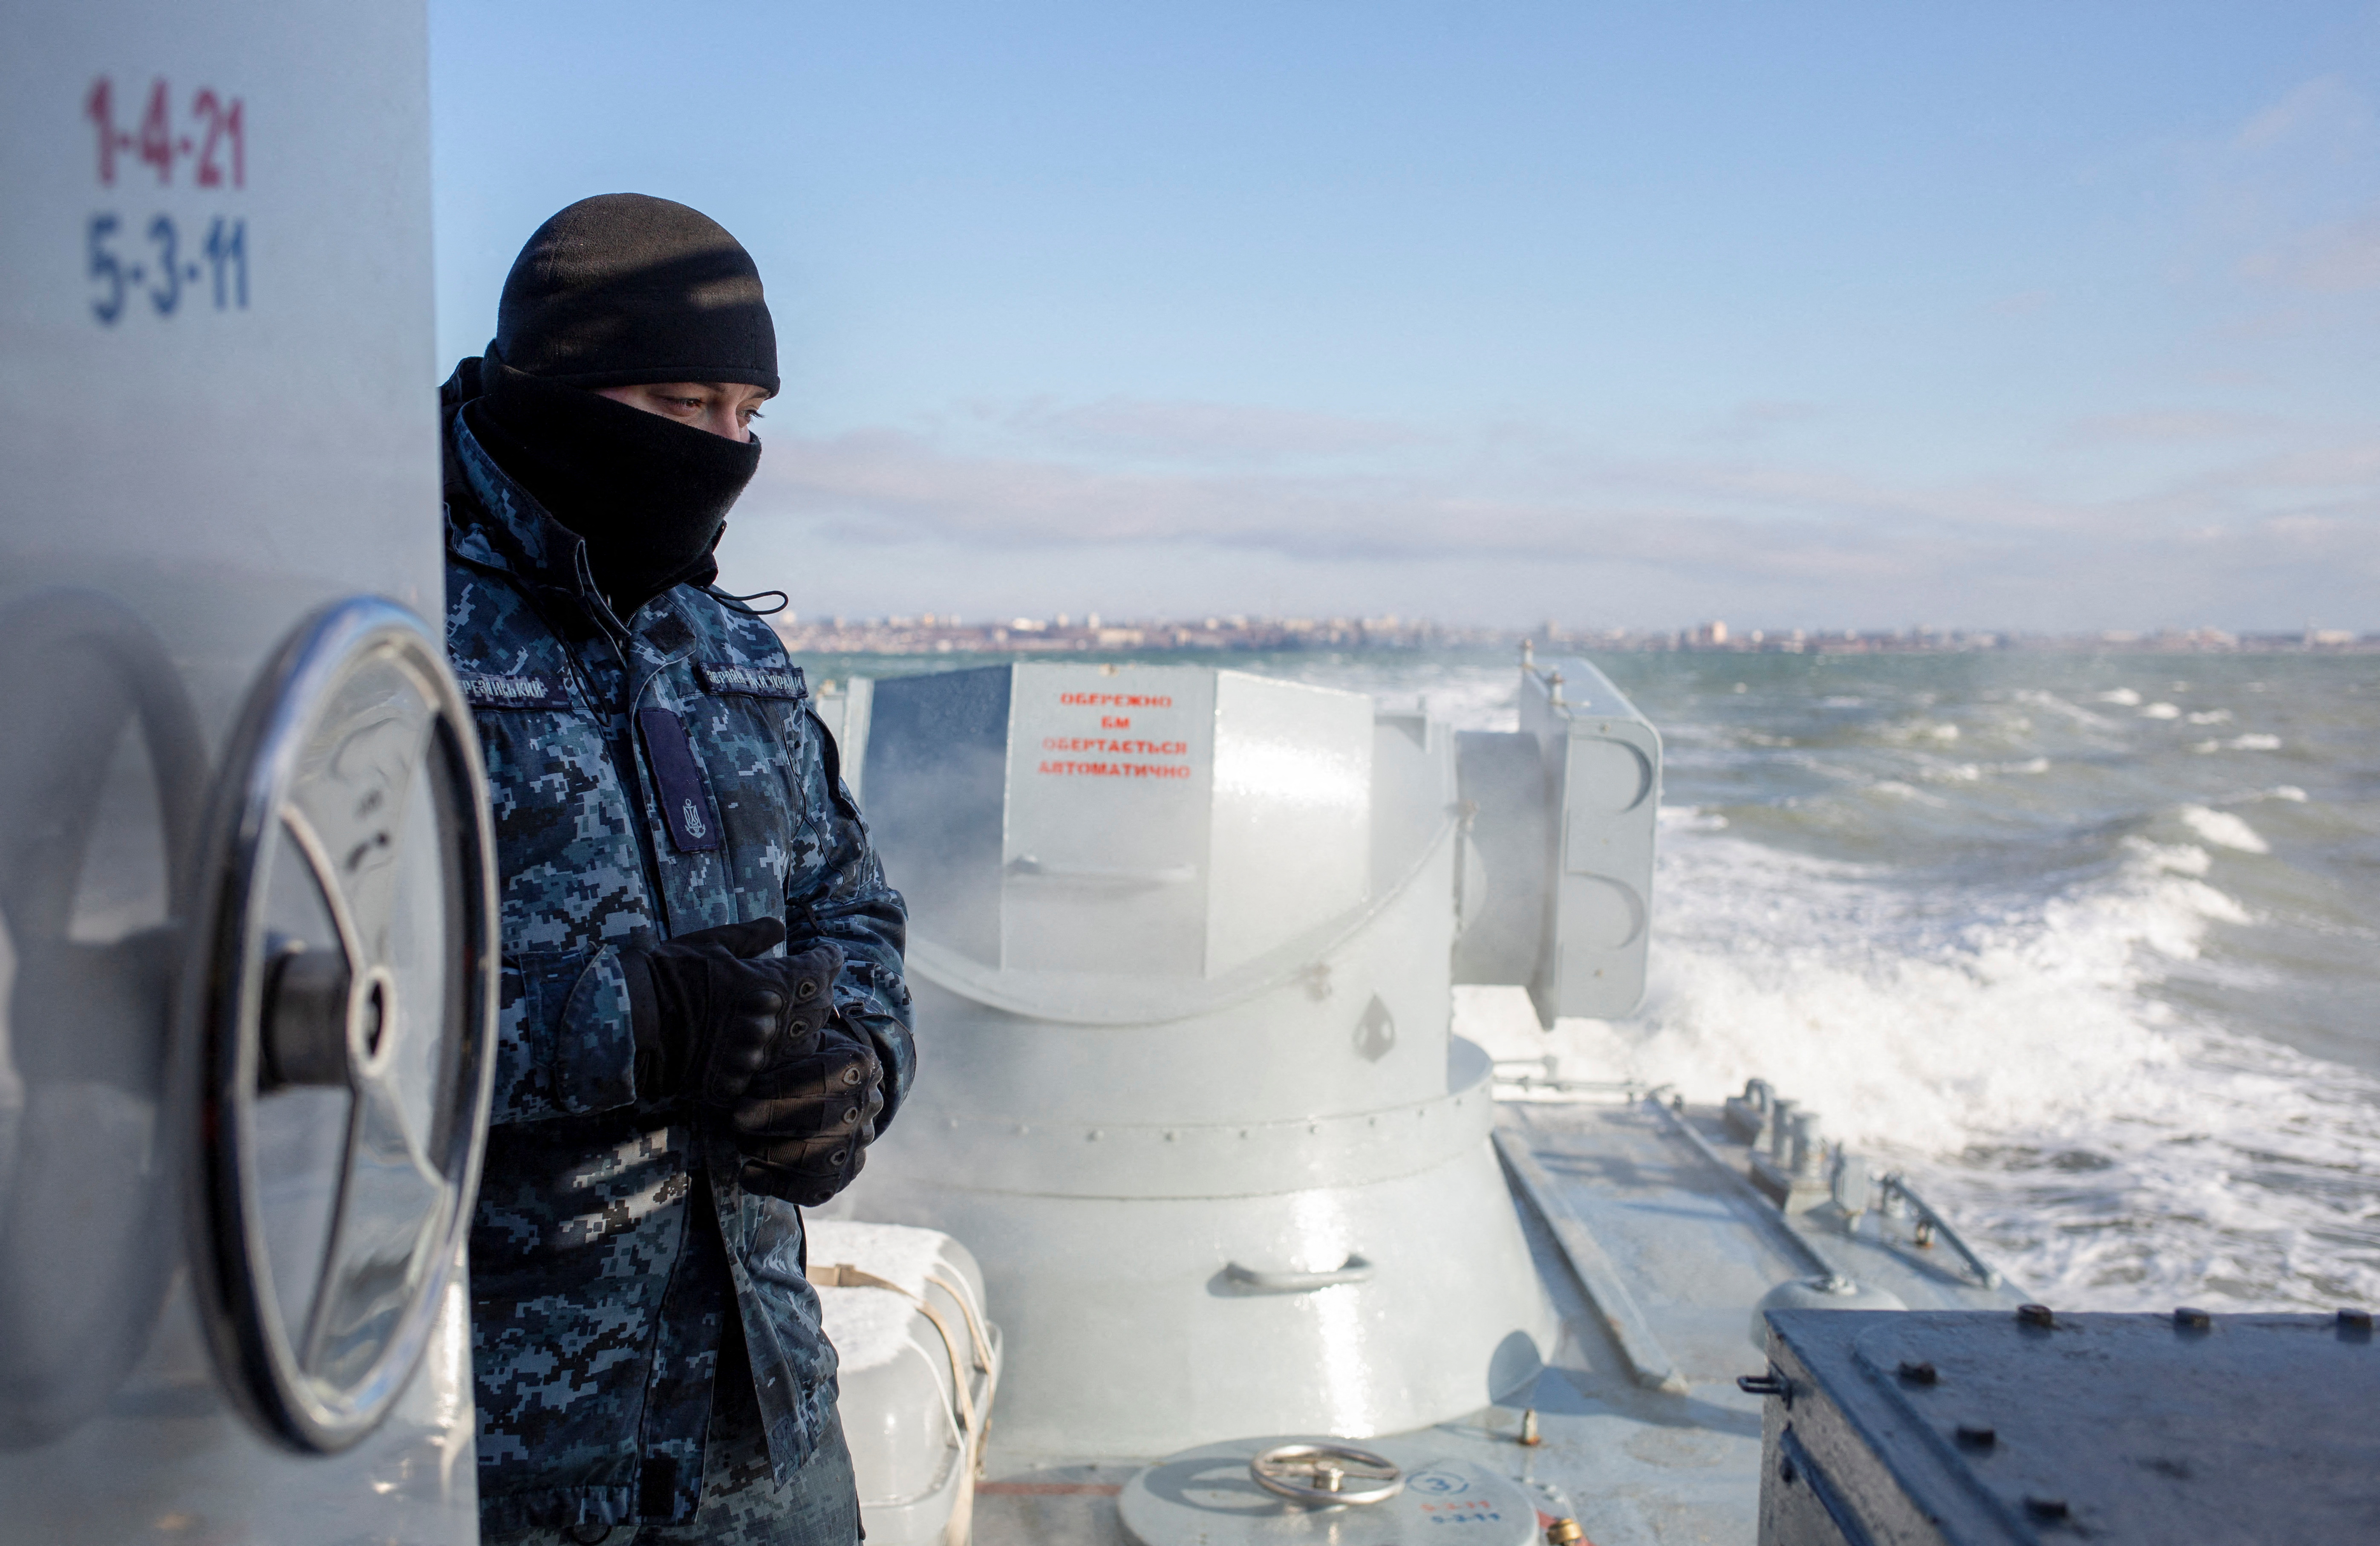 A Ukrainian navy sailor is seen on board an armoured gunboat during a short voyage near a base of the Ukrainian Naval Forces in the Azov Sea port of Berdyansk, Ukraine January 12, 2022. REUTERS/Anastasia Vlasova